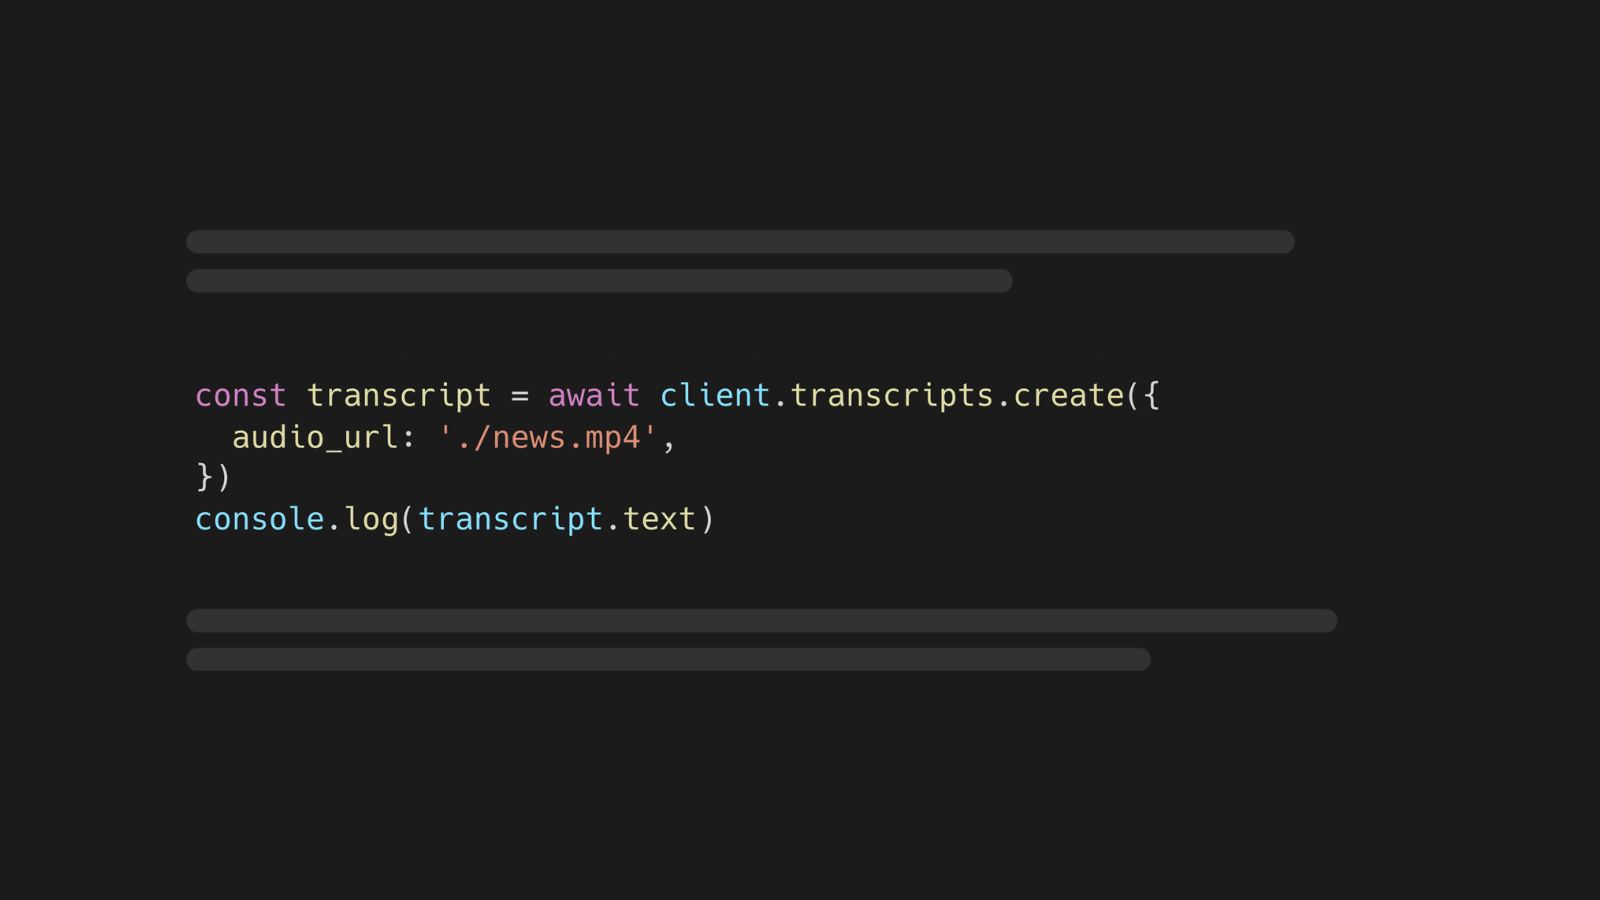 TypeScript code to transcribe an audio file and log it to the console.